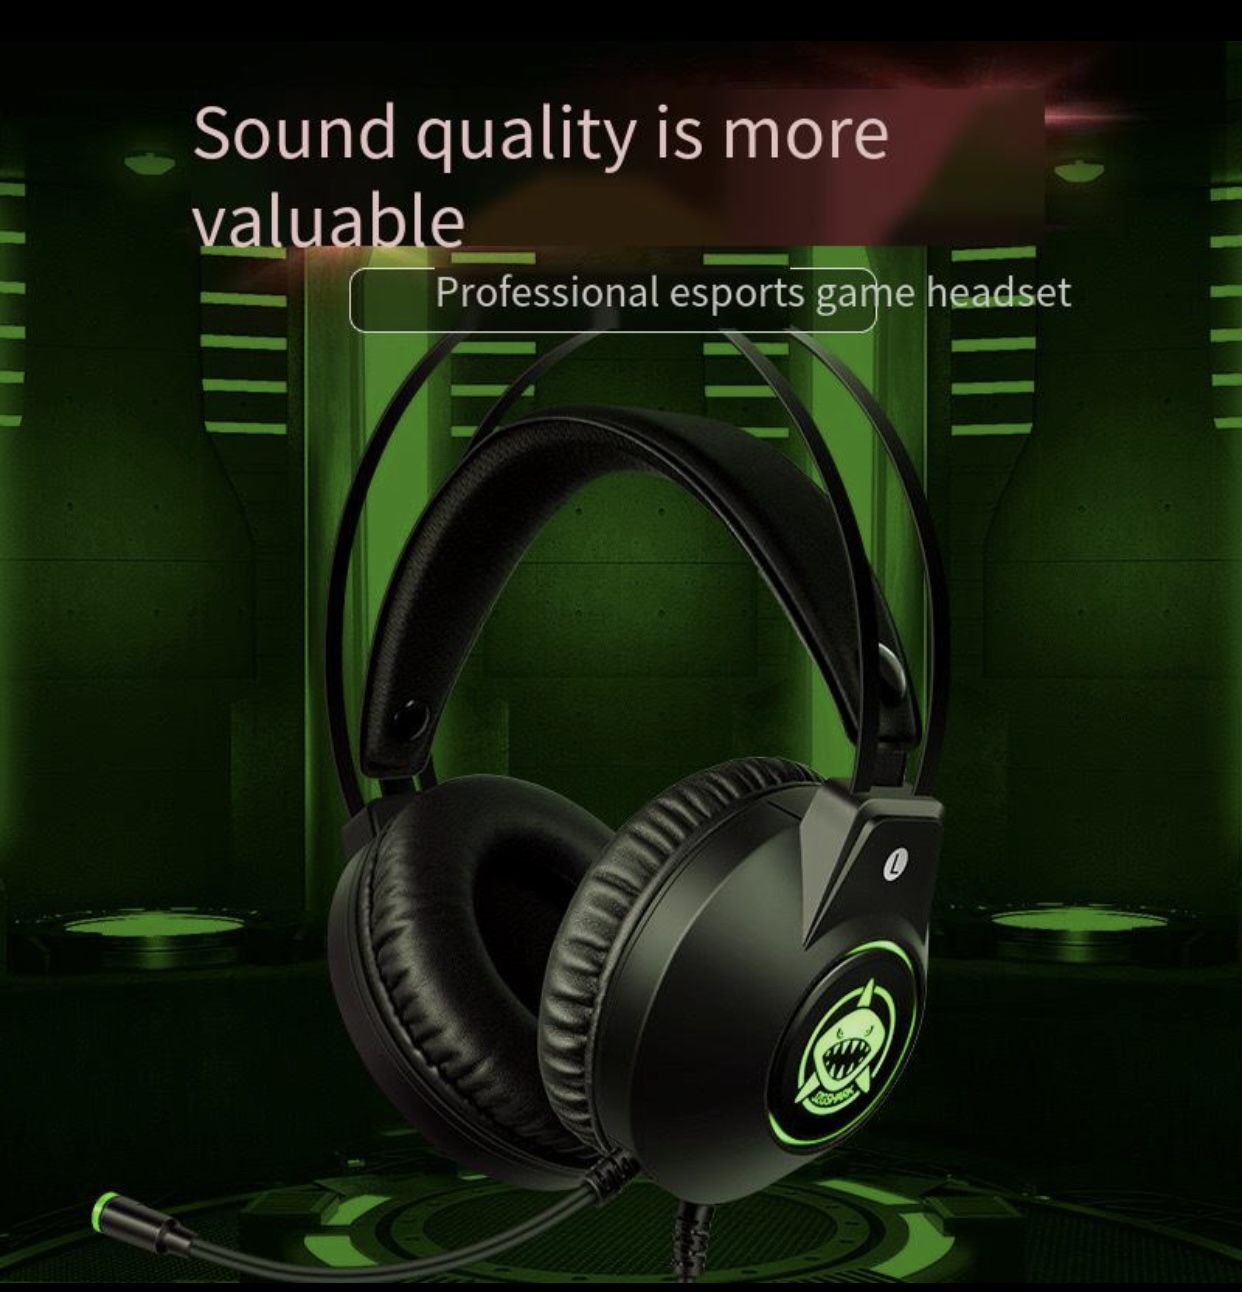 Green Shark's New Esports Headphones 7.1 Noise Reduction Game USB with Cable Earphones